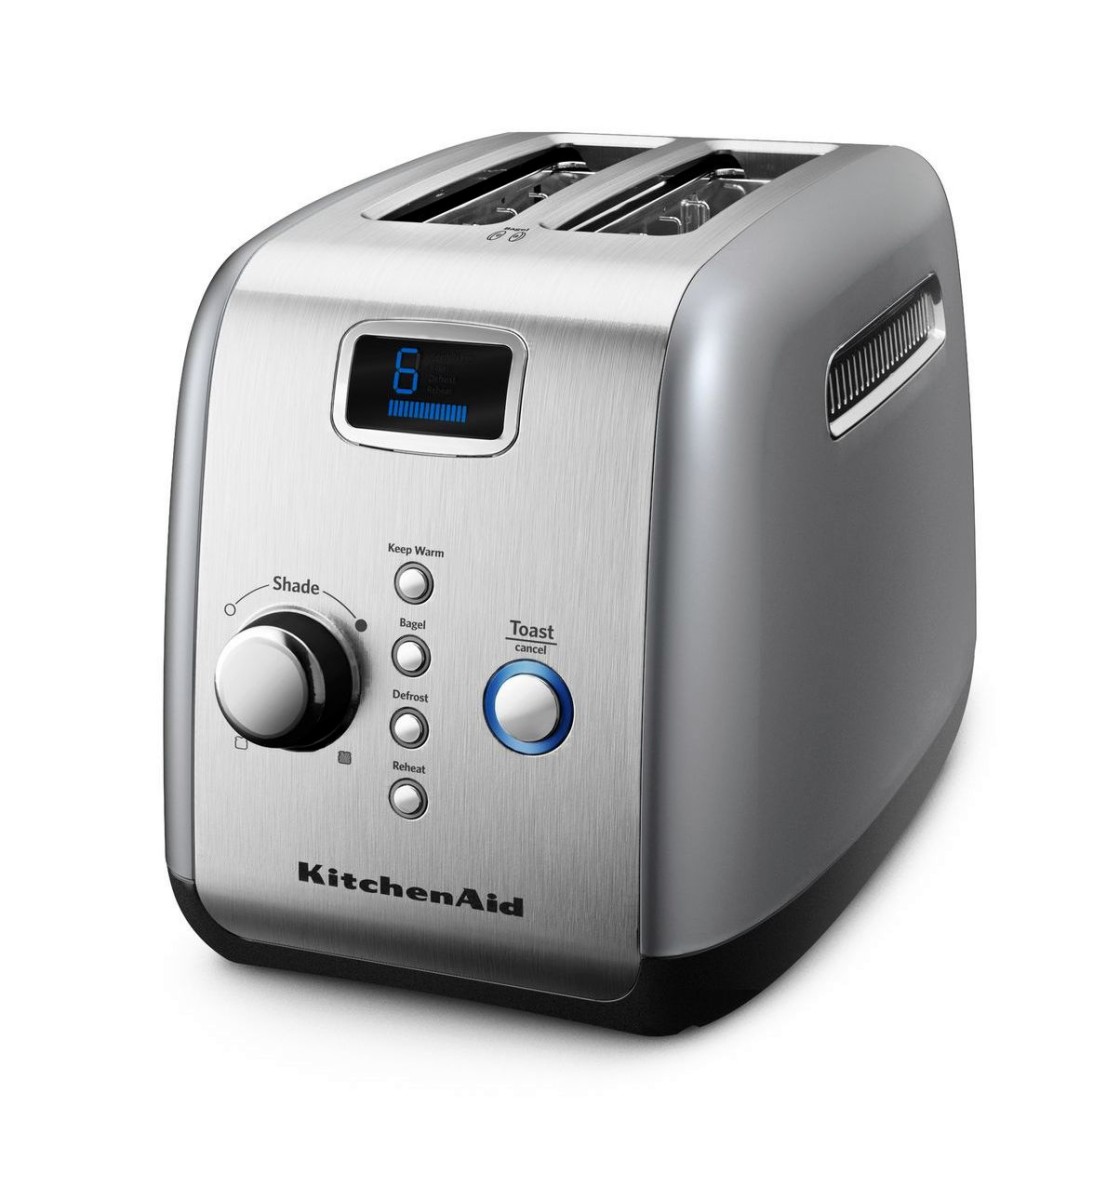 Kitchenaid 2-Slice Toaster with One Touch Lift/ Lower & Digital Display, Model # KMT223CU